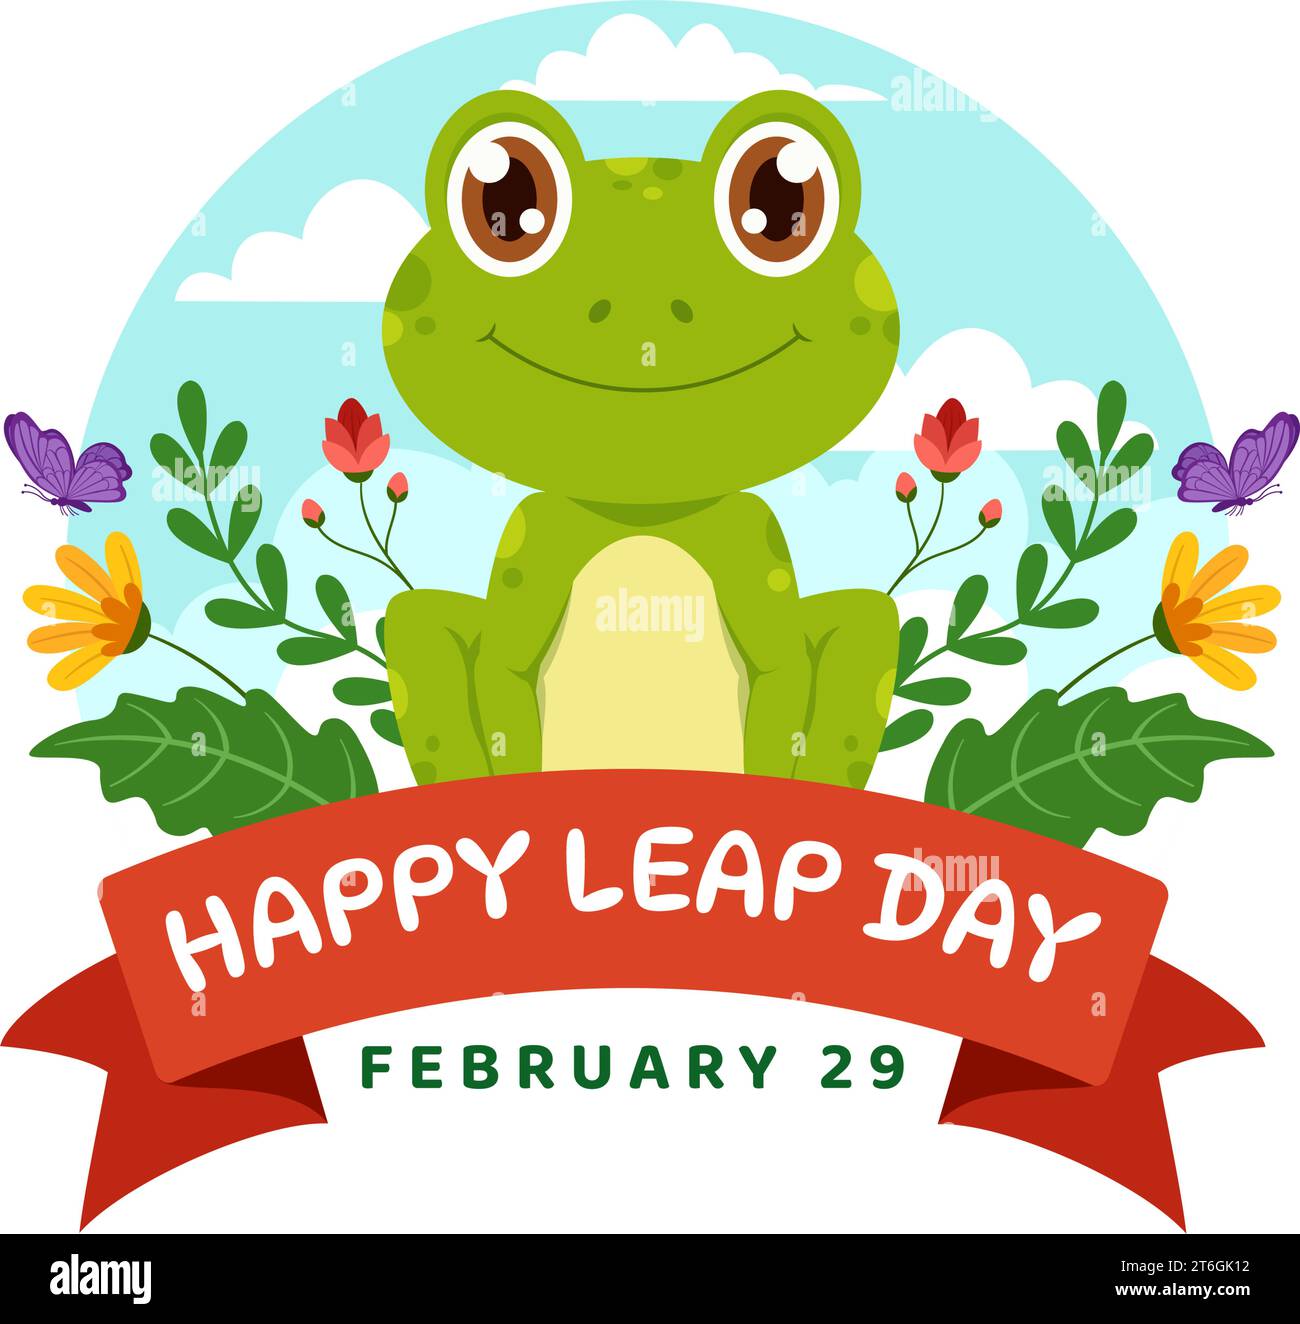 Happy Leap Day Vector Illustration on 29 February with Jumping Frogs and Pond Background in Holiday Celebration Flat Cartoon Design Stock Vector